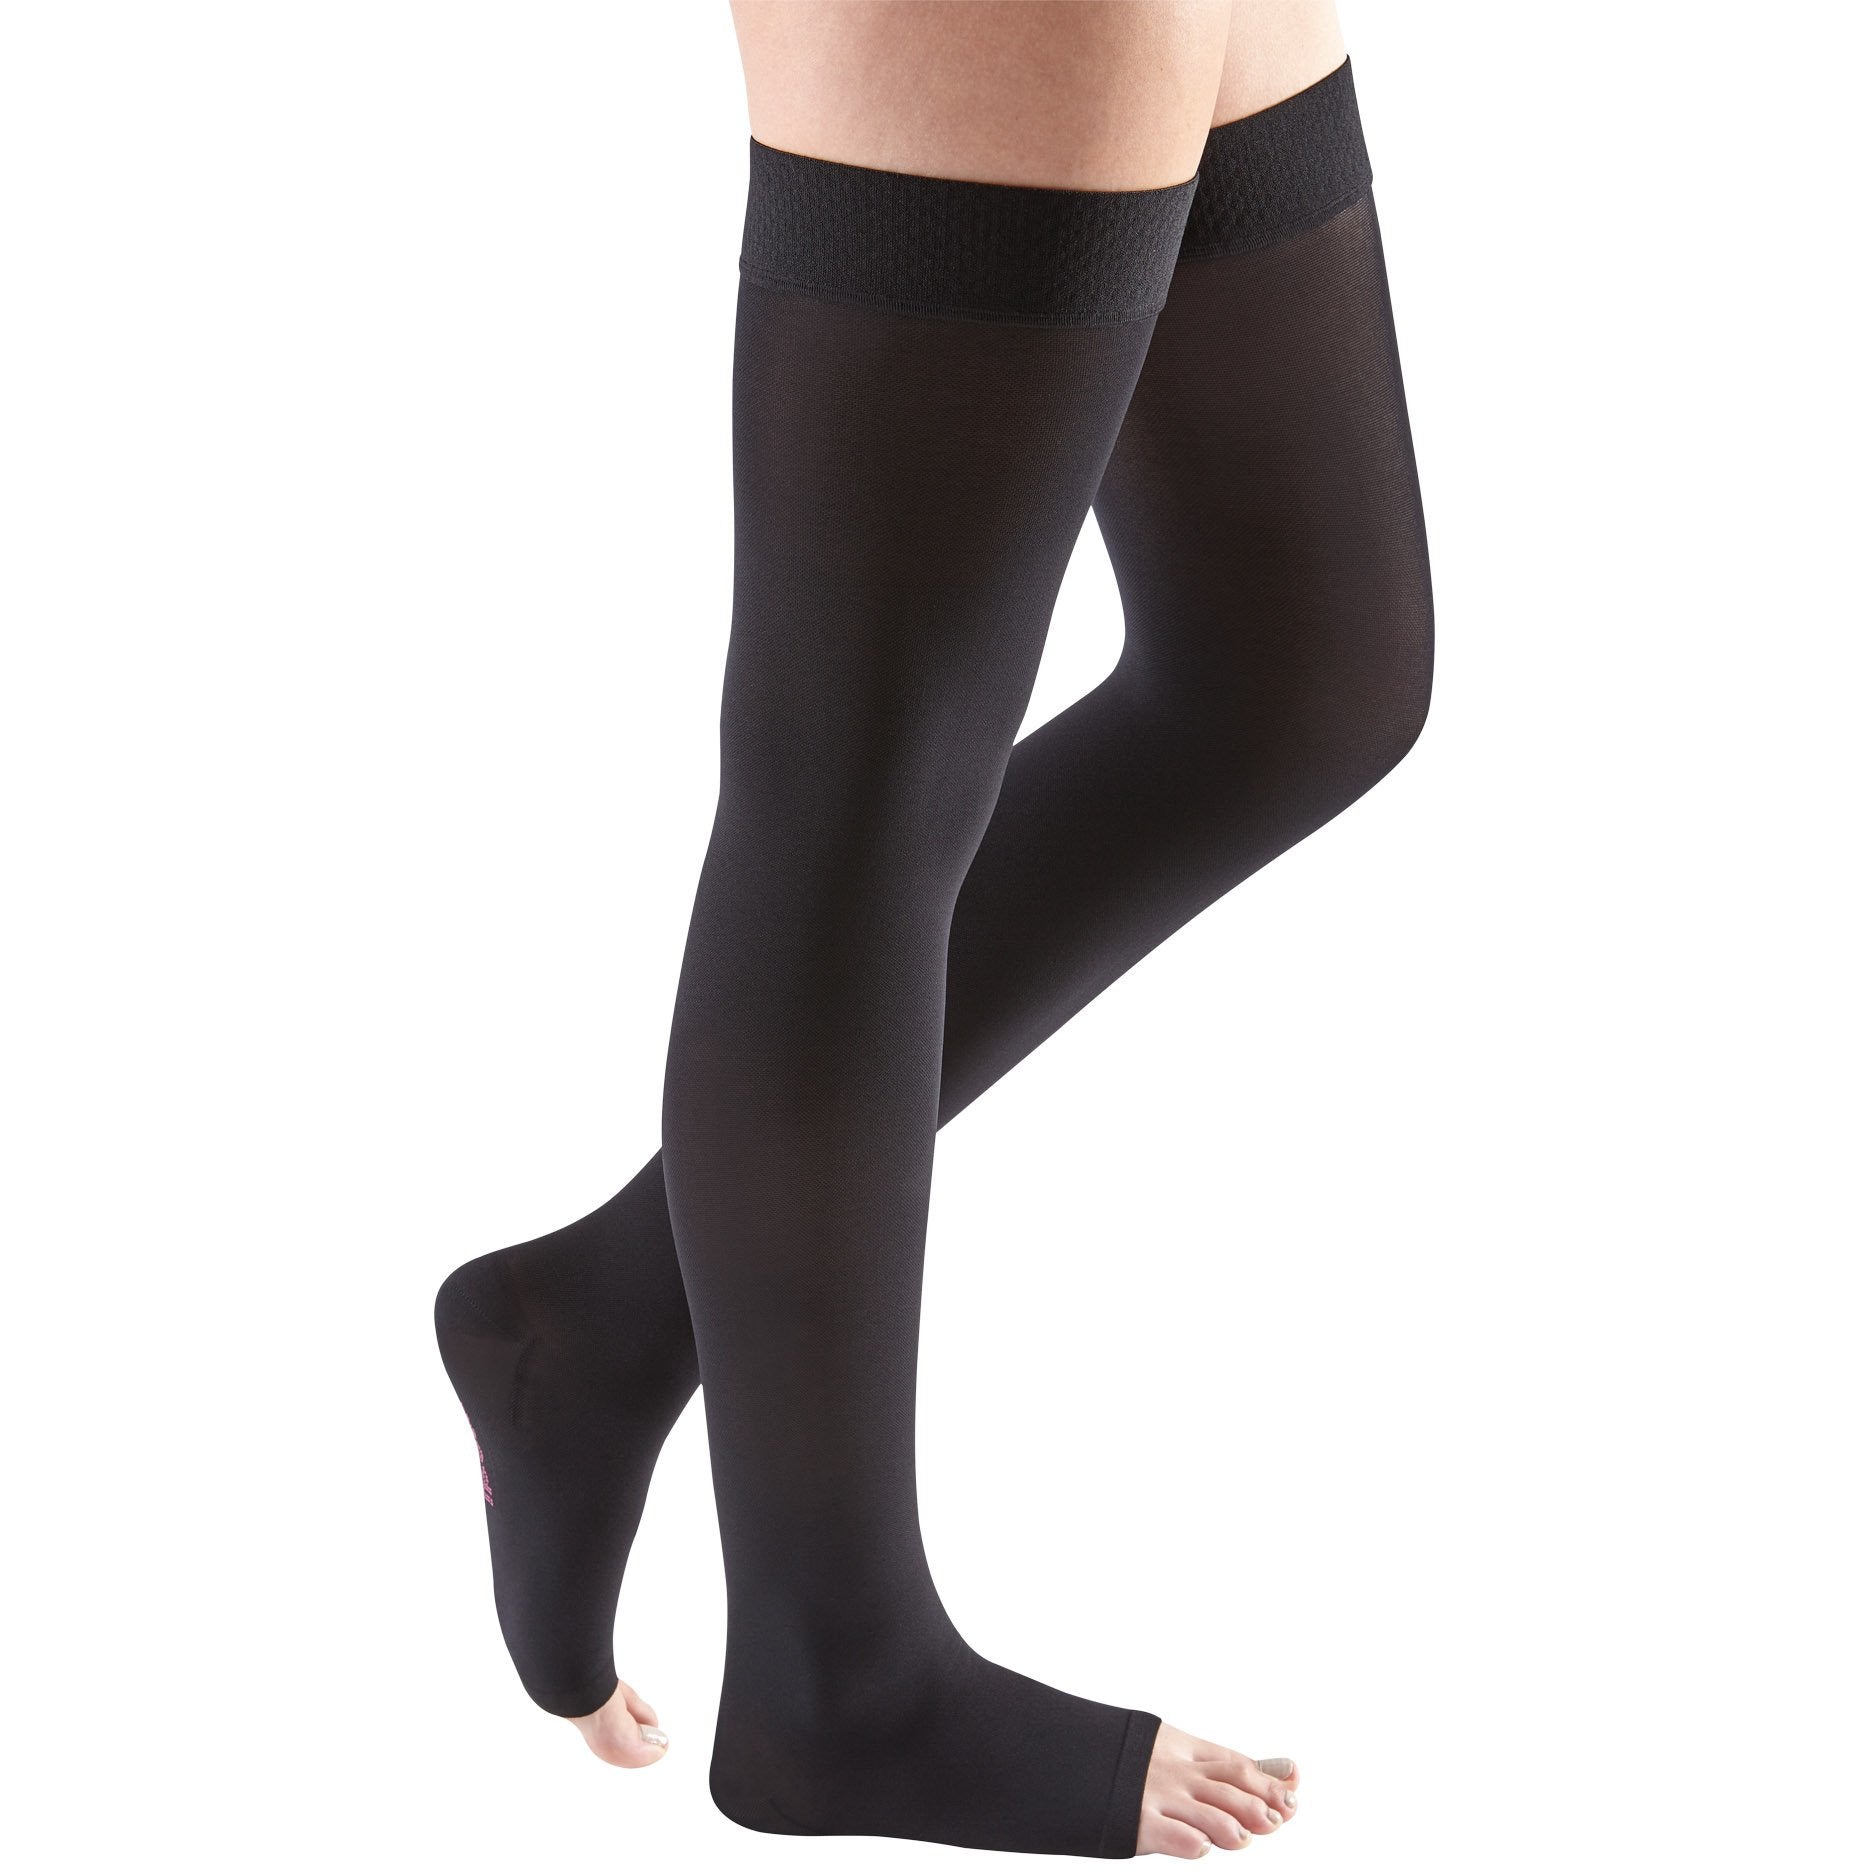 Mediven Comfort 30-40 mmHg OPEN TOE Thigh High w/ Beaded Silicone Top Band, Ebony